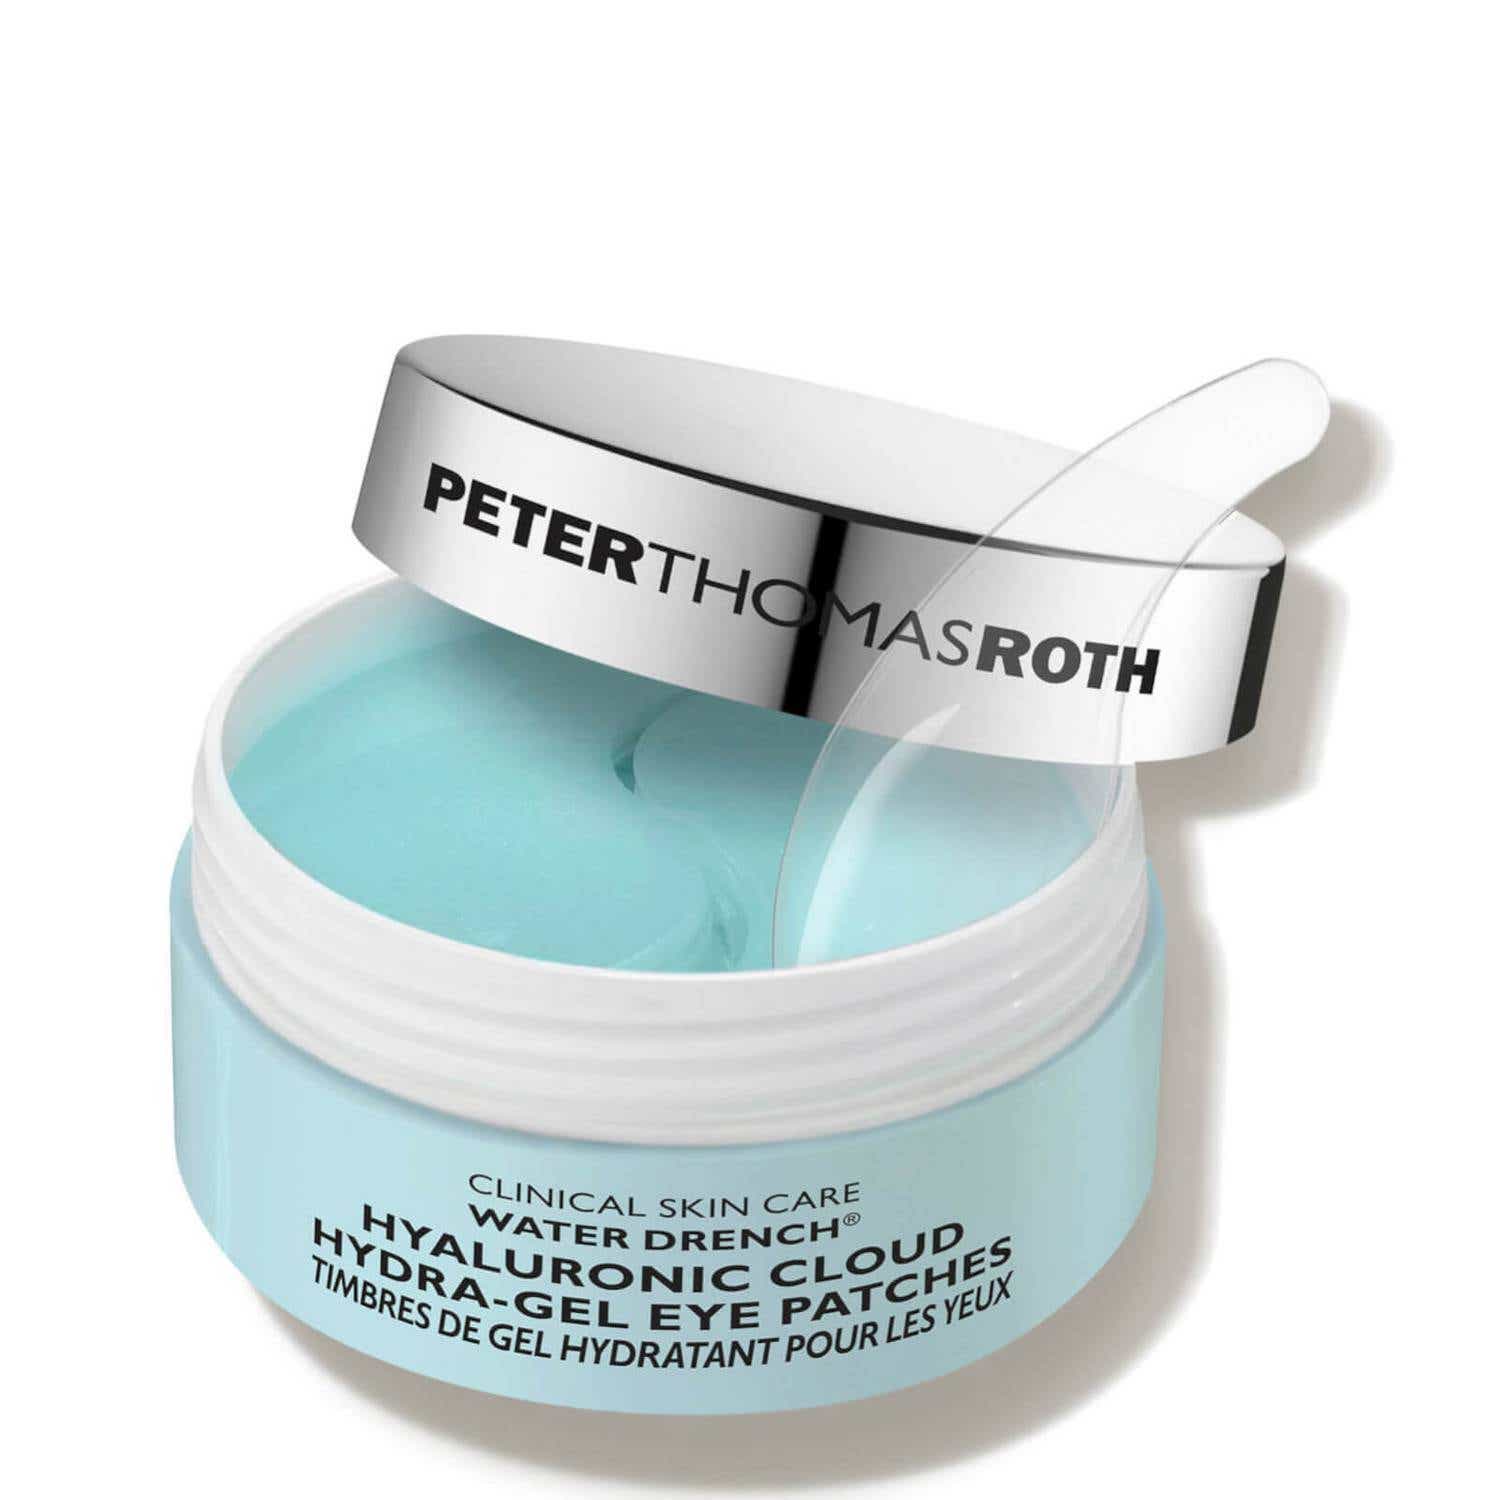 Water Drench Hyaluronic Cloud Hydra-Gel Eye Patches by Peter Thomas Roth